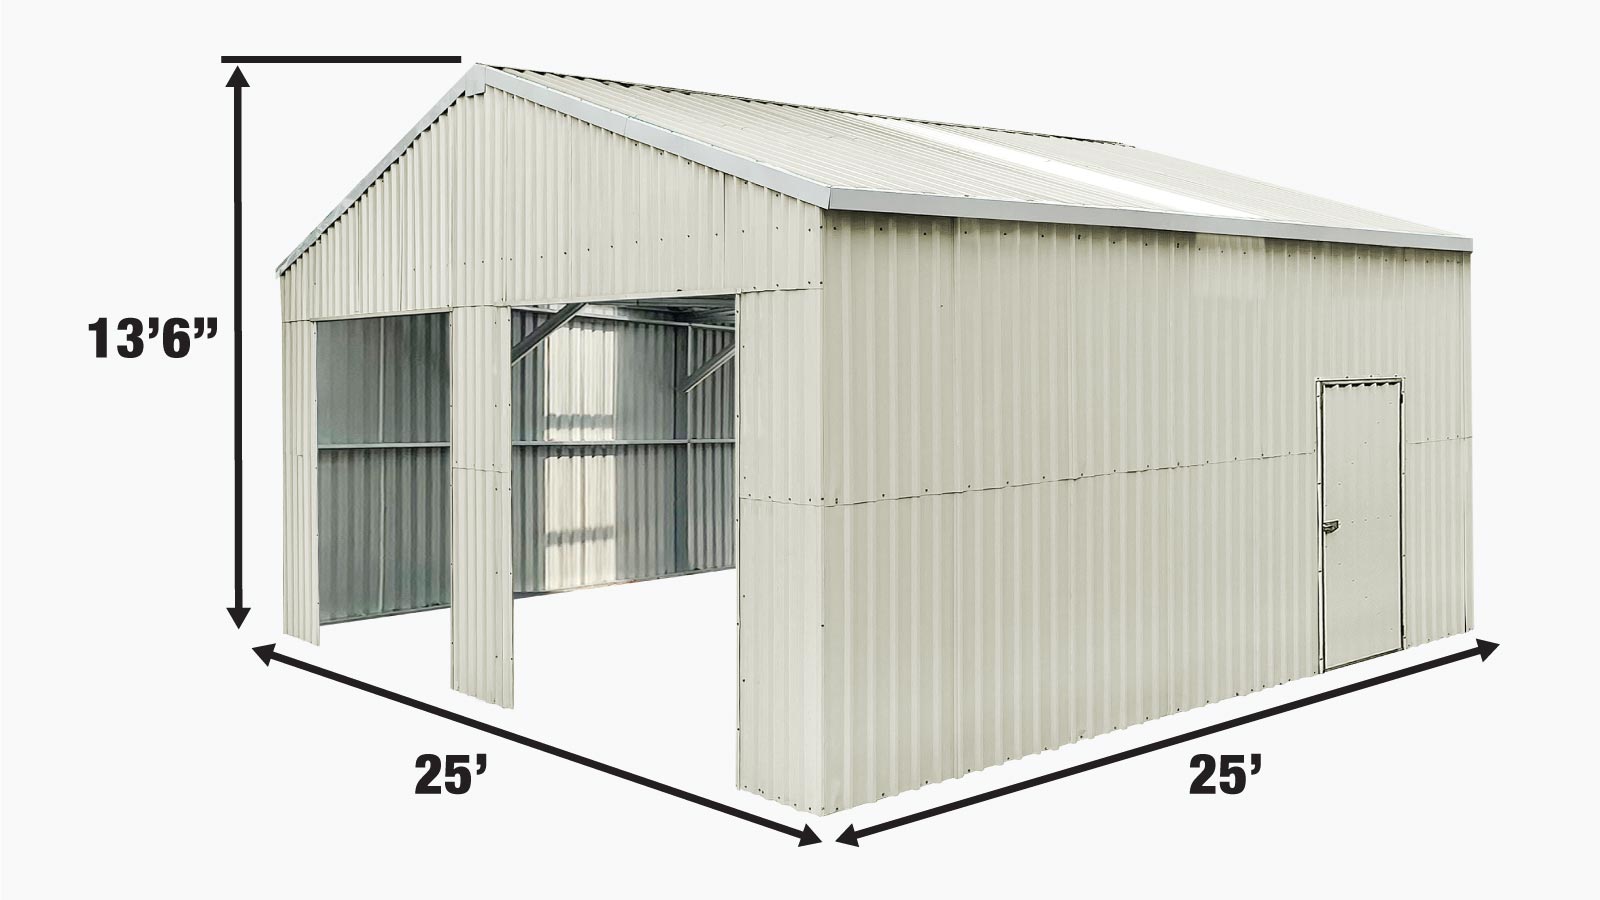 TMG Industrial 25’ x 25’ Double Garage Metal Barn Shed with Side Entry Door, 625 Sq-Ft Floor Space, 9’8” Eave Height, 27 GA Metal, Skylights, 4/12 Roof Pitch, TMG-MS2525-specifications-image